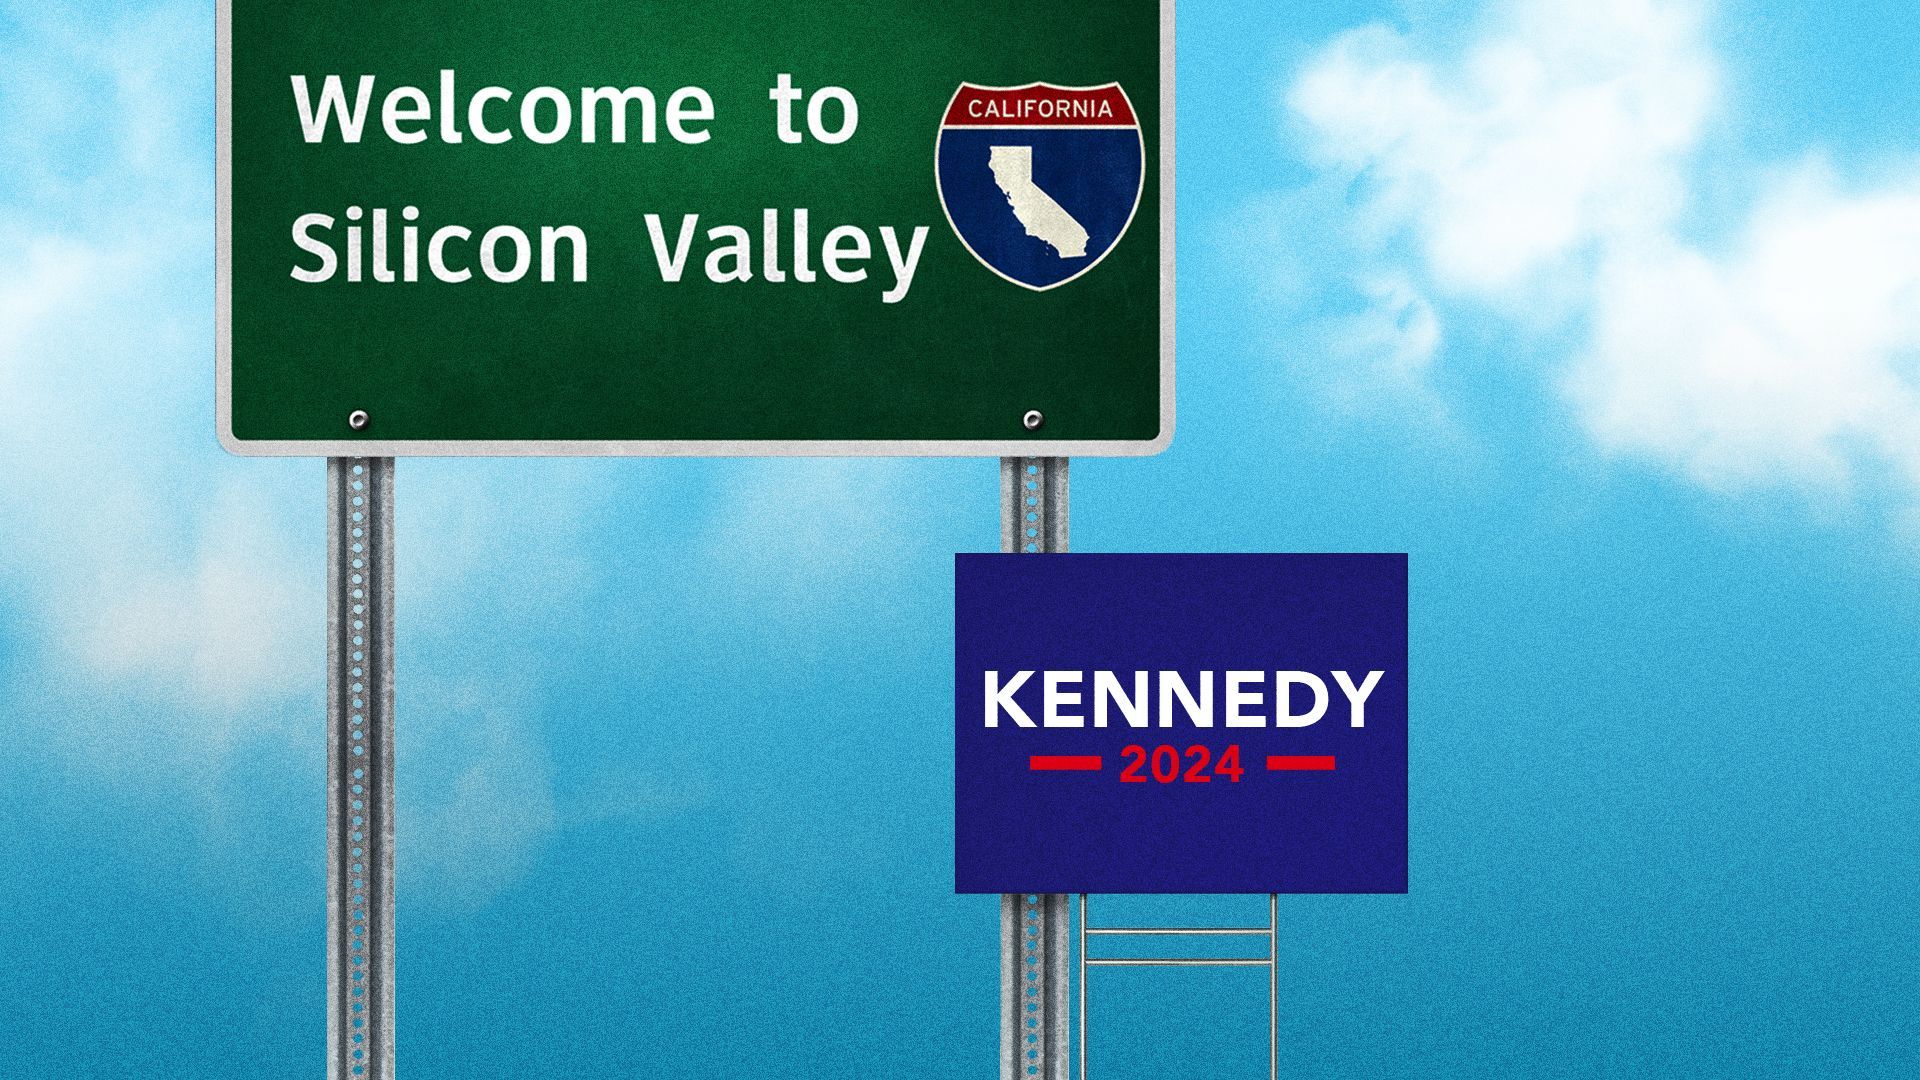 Illustration of a Kennedy campaign yard sign next to a sign that says "Welcome to Silicon Valley."